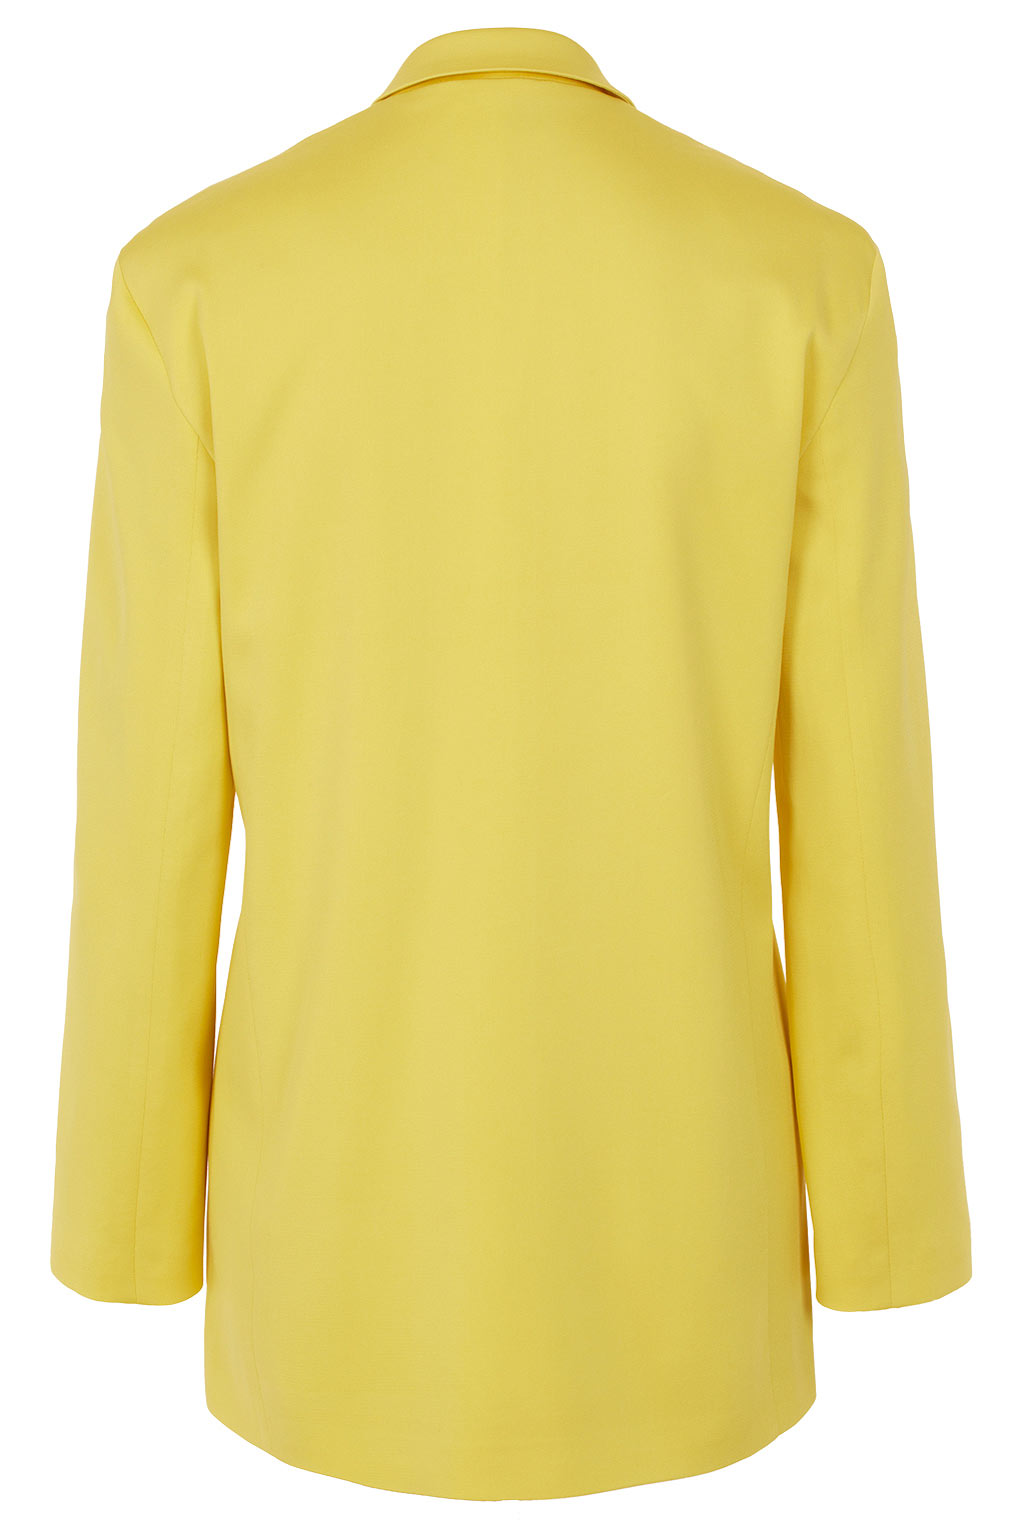 Lyst - Topshop Yellow Blazer By Unique in Yellow